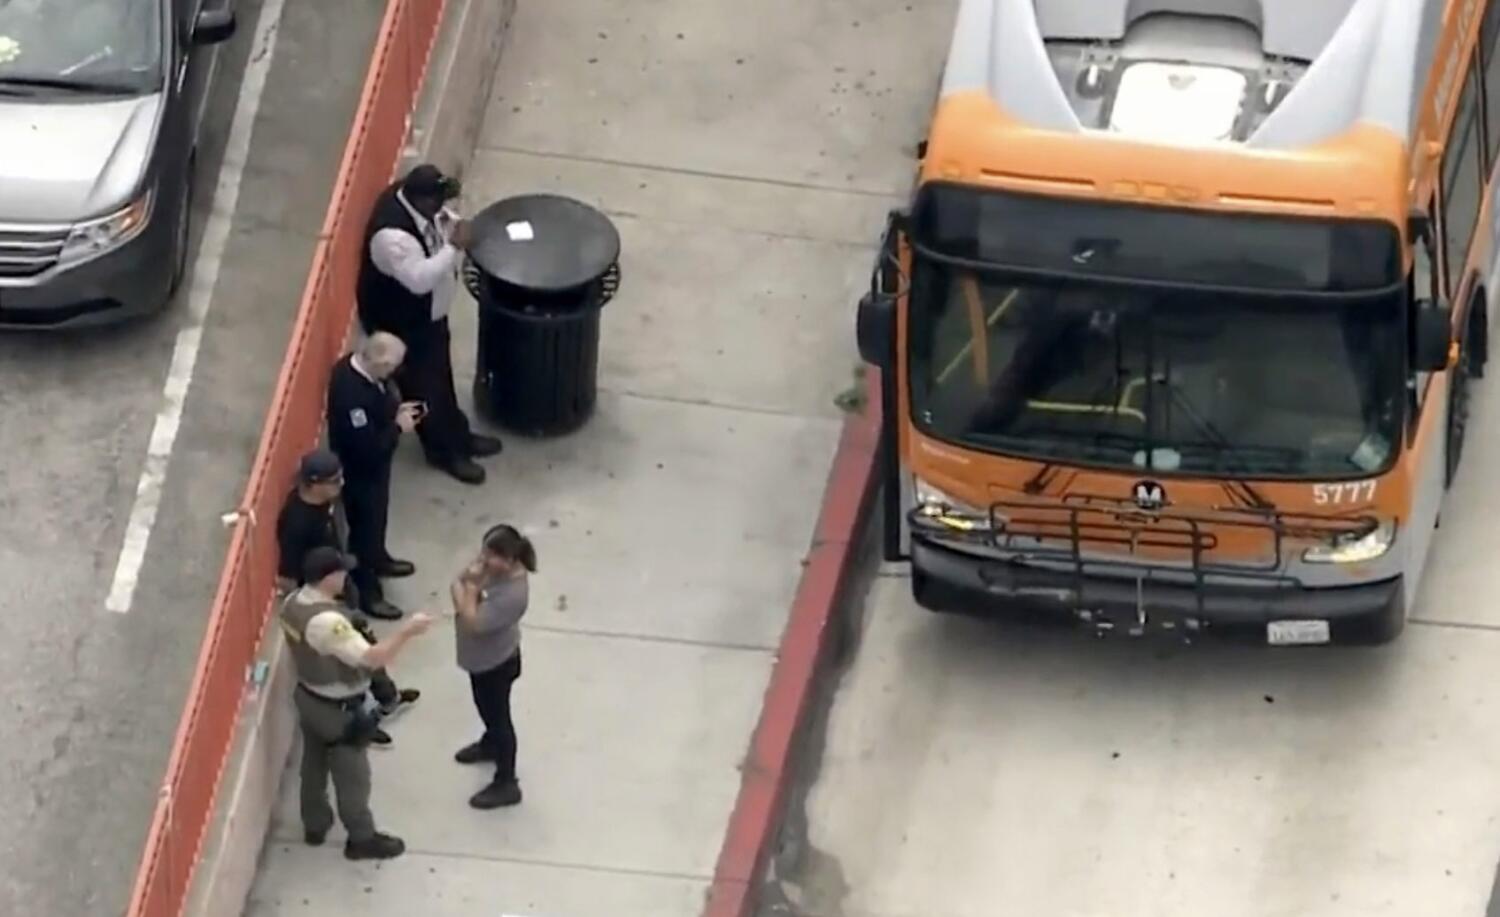 stabbing-on-metro-bus-in-lynwood-is-latest-violence-connected-to-la.’s-mass-transit-system